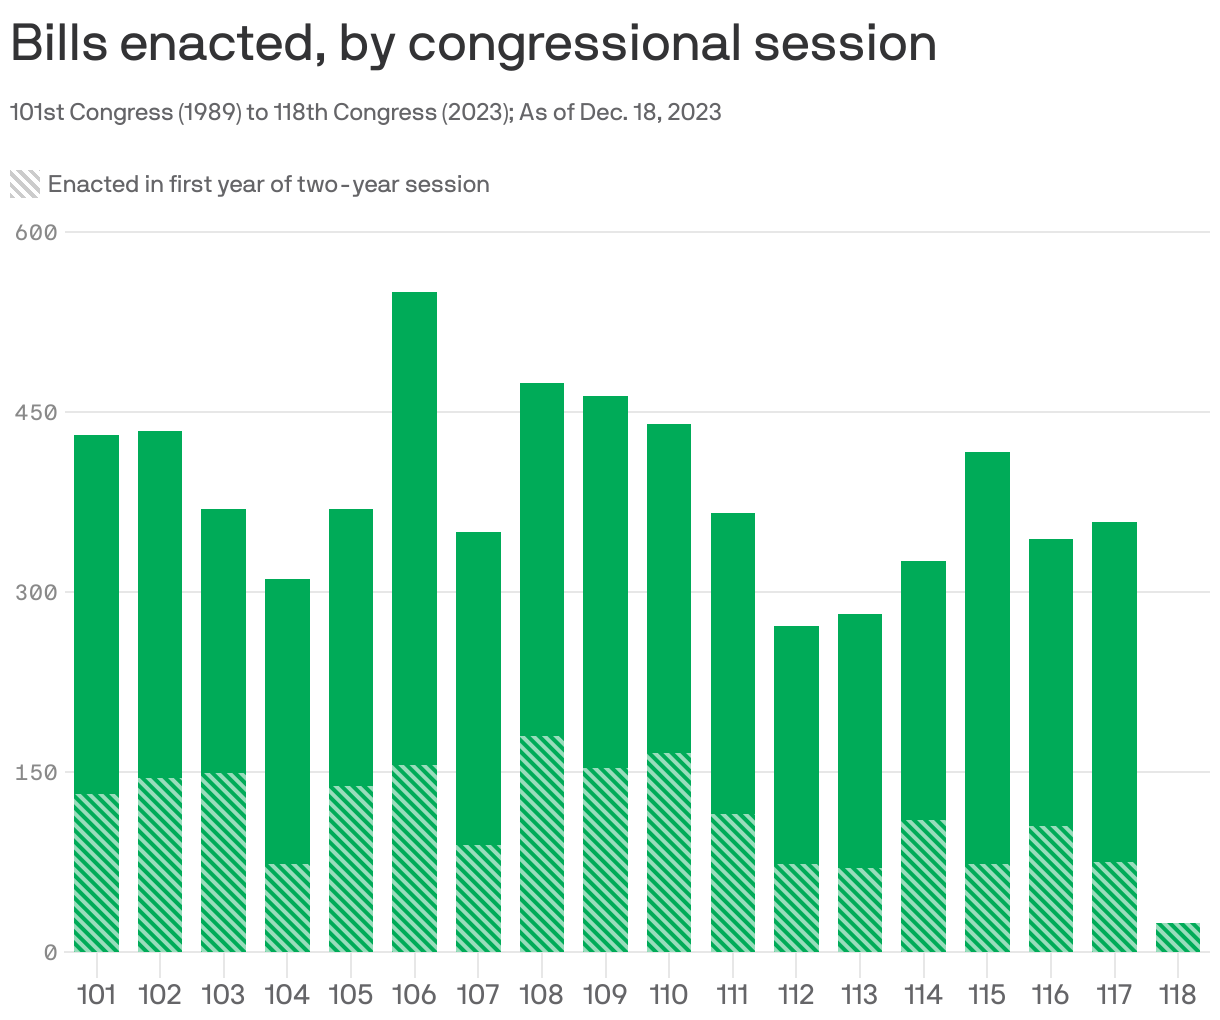 Bills enacted, by congressional session